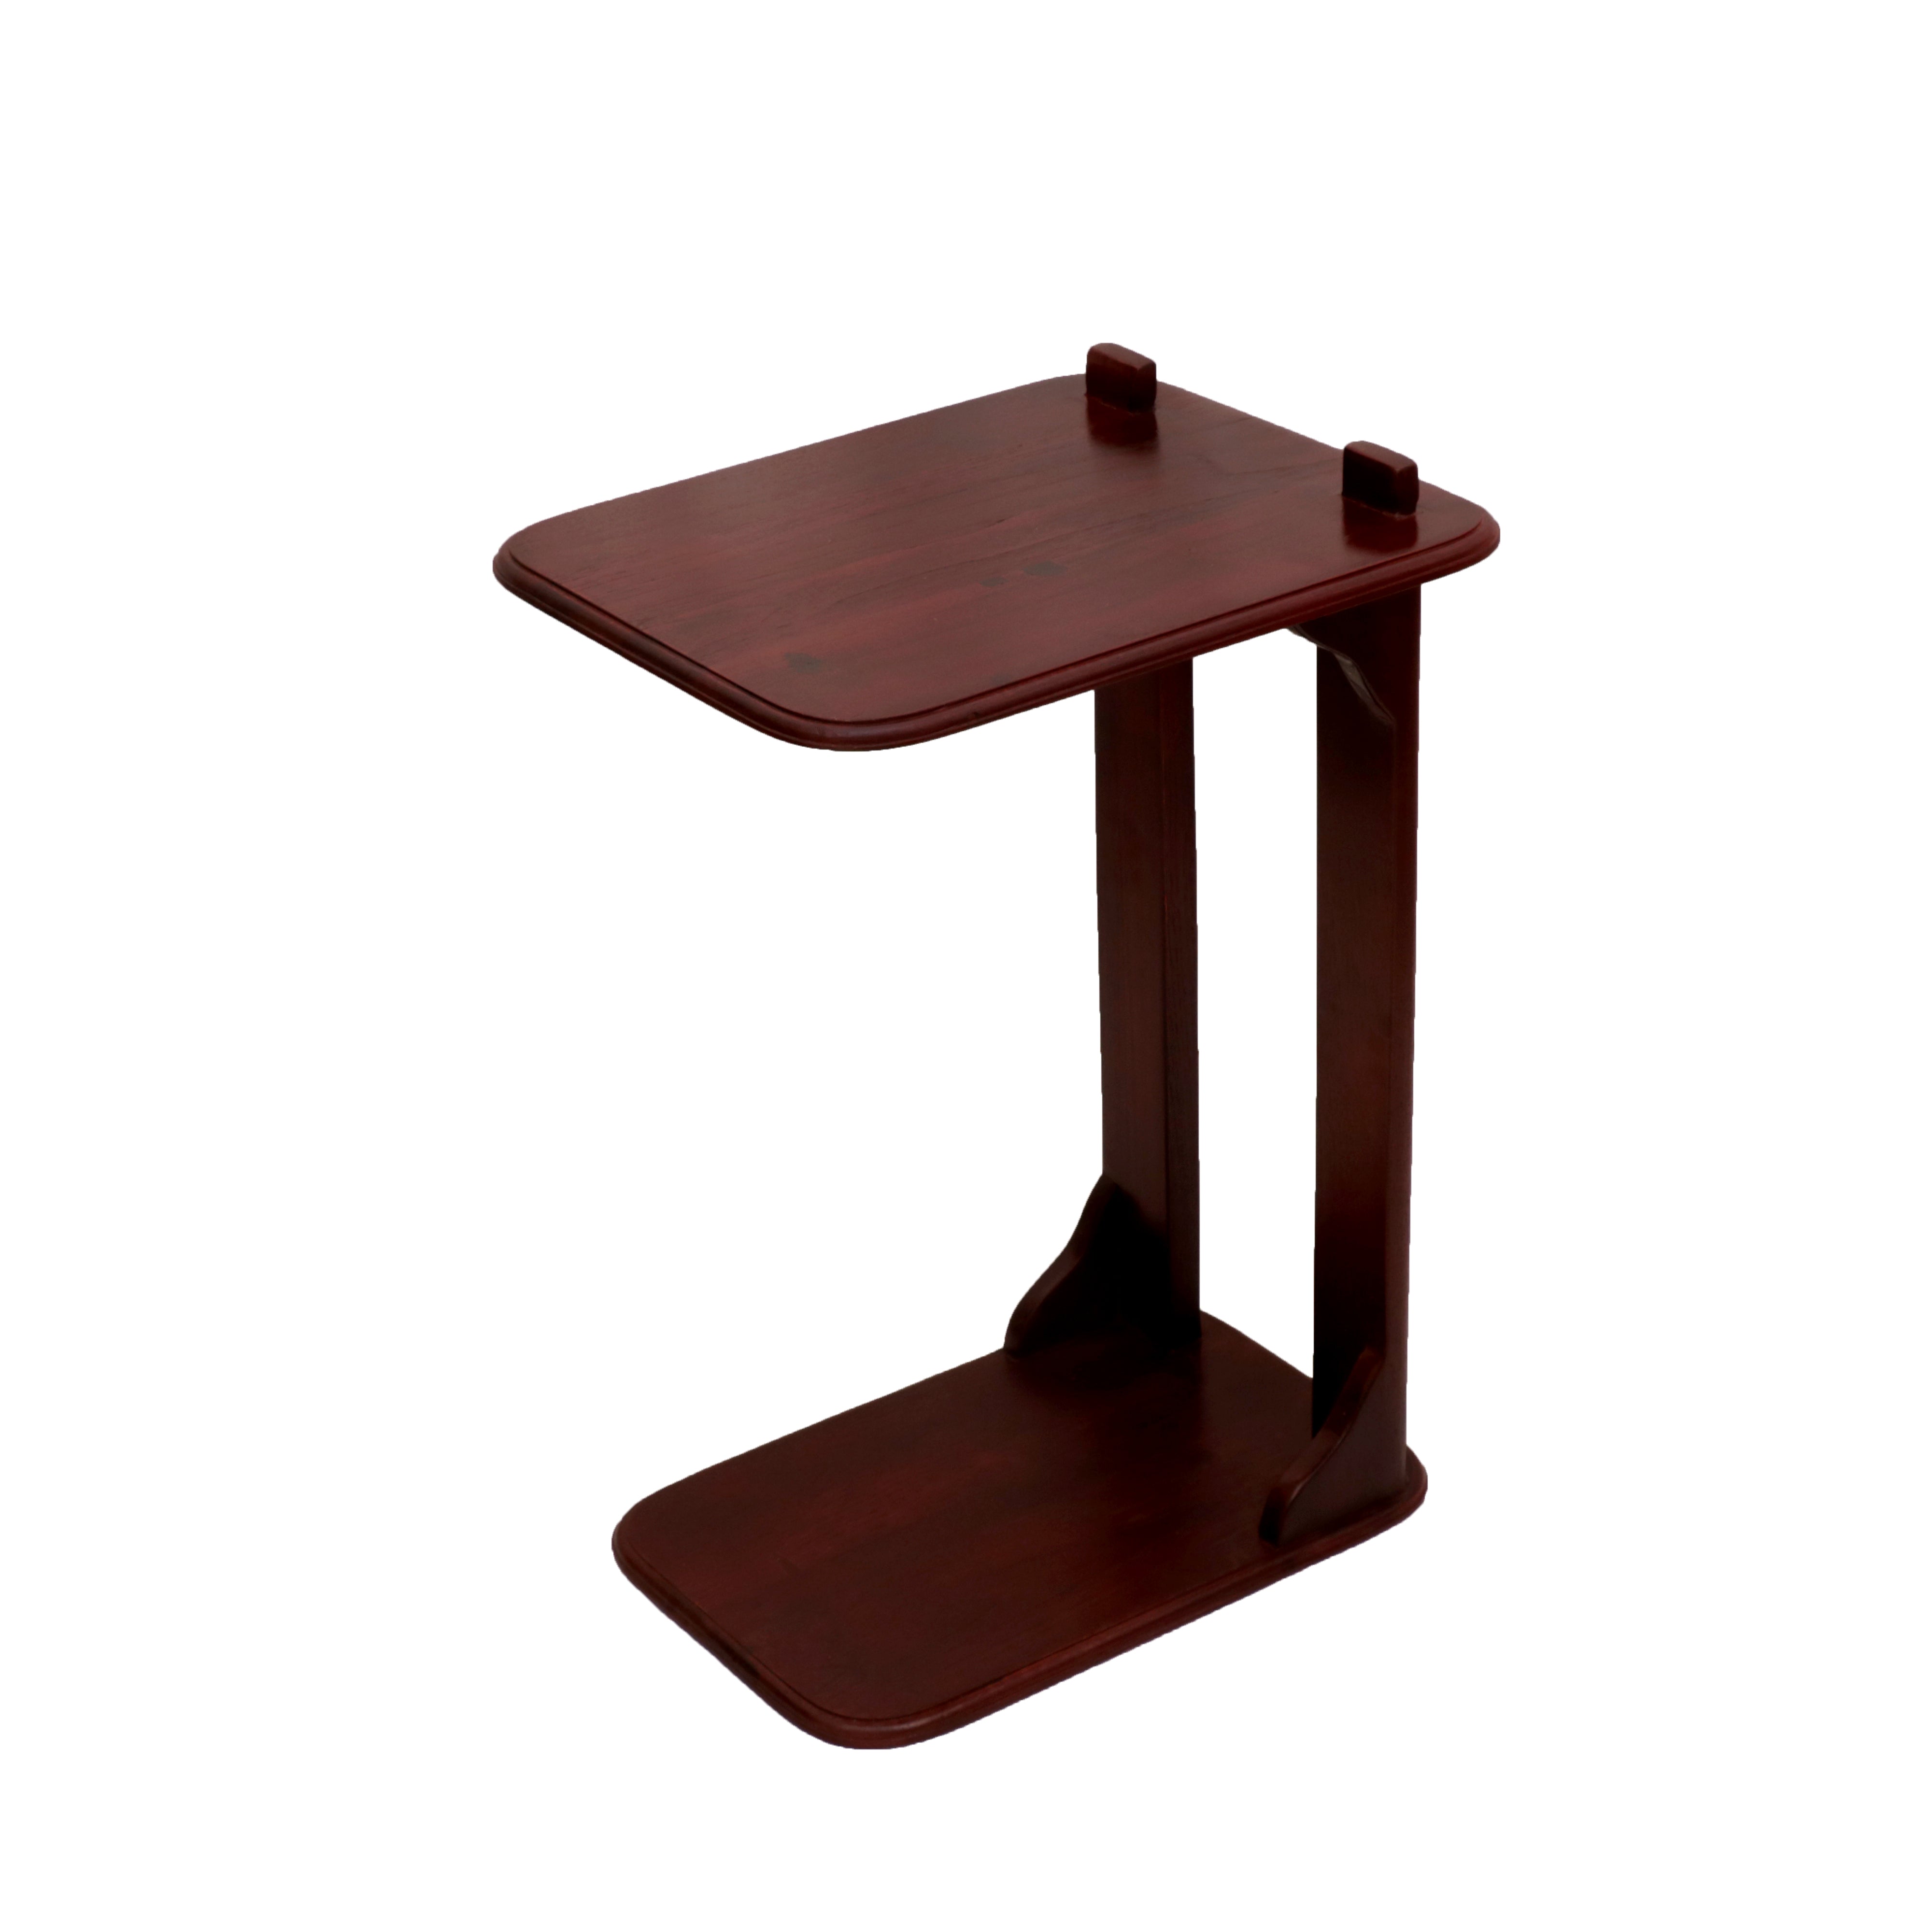 Wooden C Table (Mahogany Touch) C Table